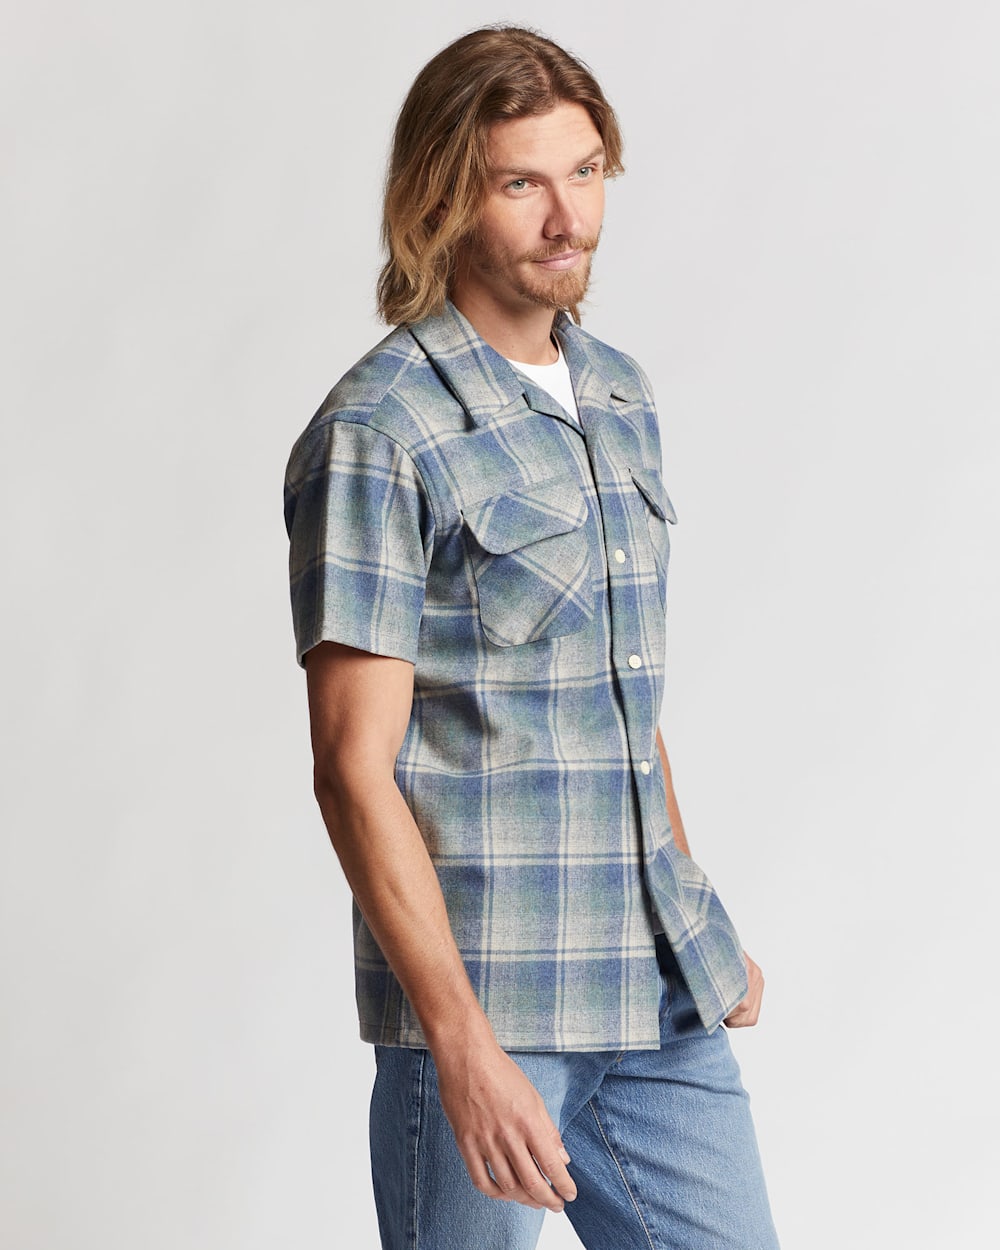 ALTERNATE VIEW OF MEN'S PLAID SHORT-SLEEVE BOARD SHIRT IN BLUE MIX PLAID image number 2